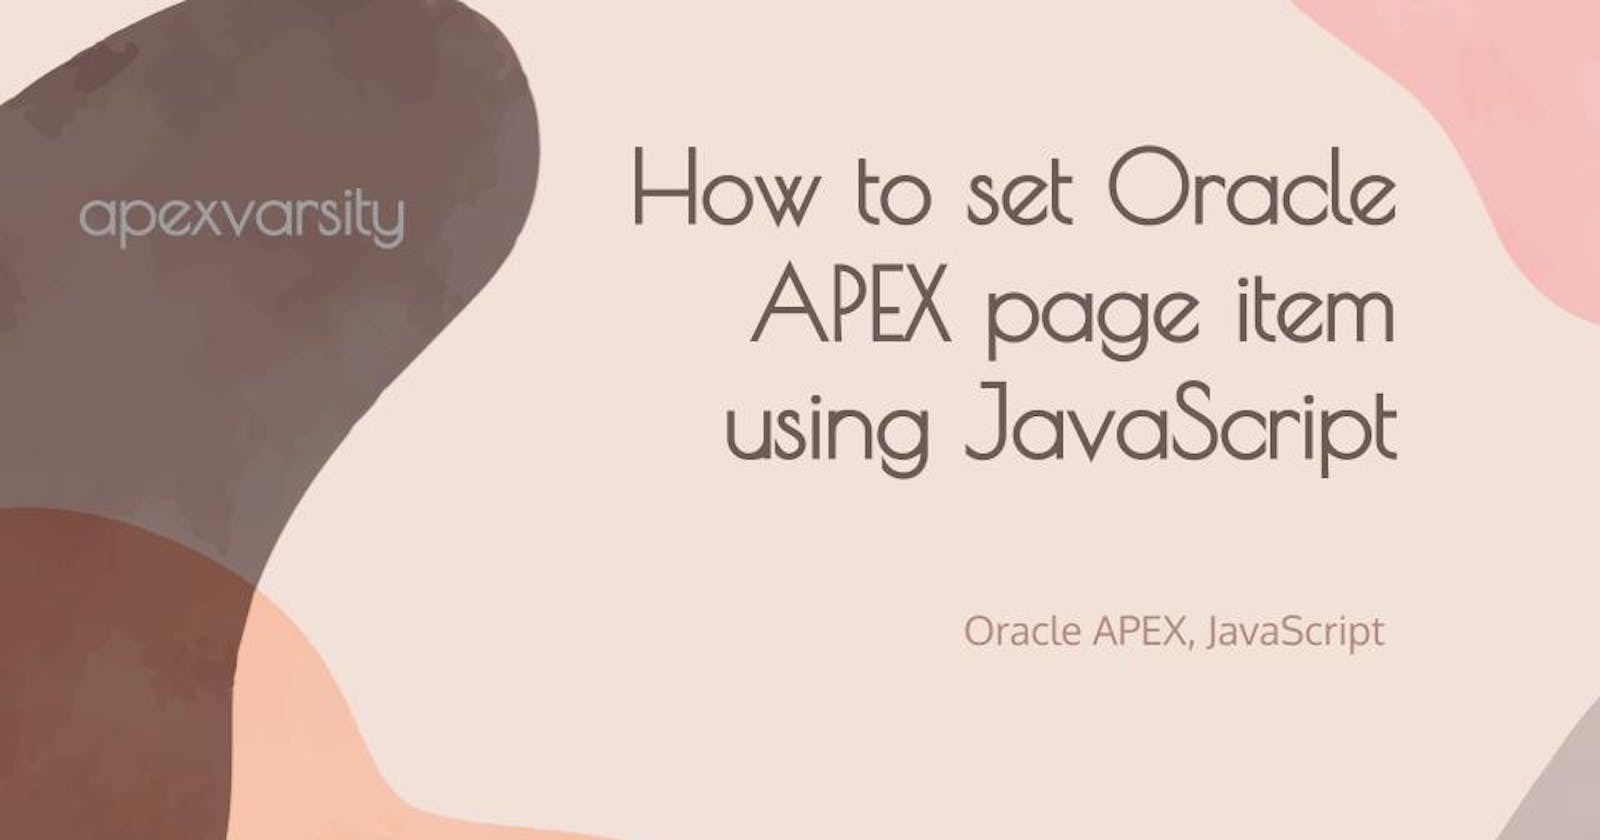 How to set Oracle APEX page items using JavaScript?